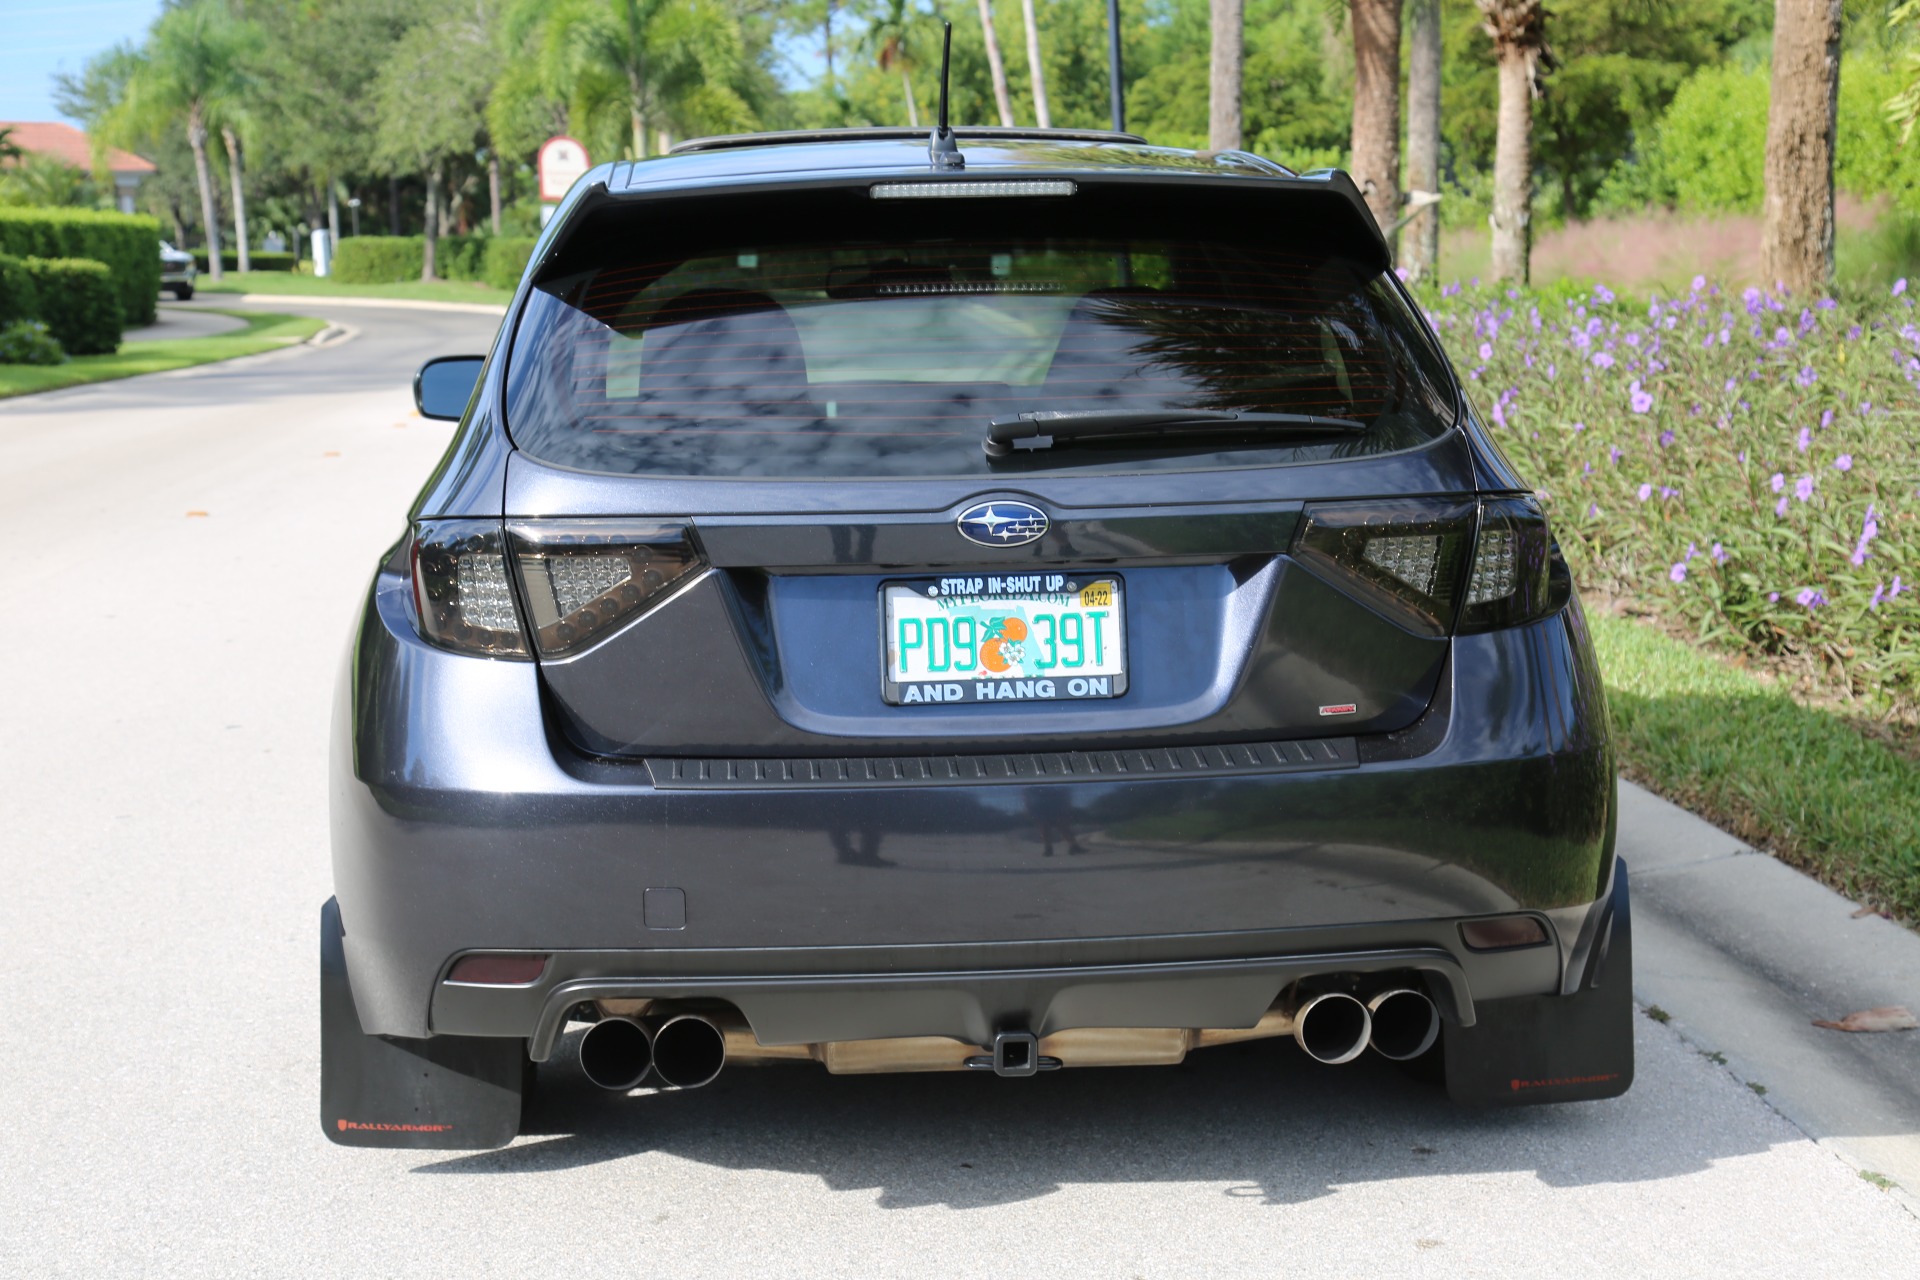 Used 2013 Subaru Impreza WRX Premium Hatch for sale Sold at Muscle Cars for Sale Inc. in Fort Myers FL 33912 6